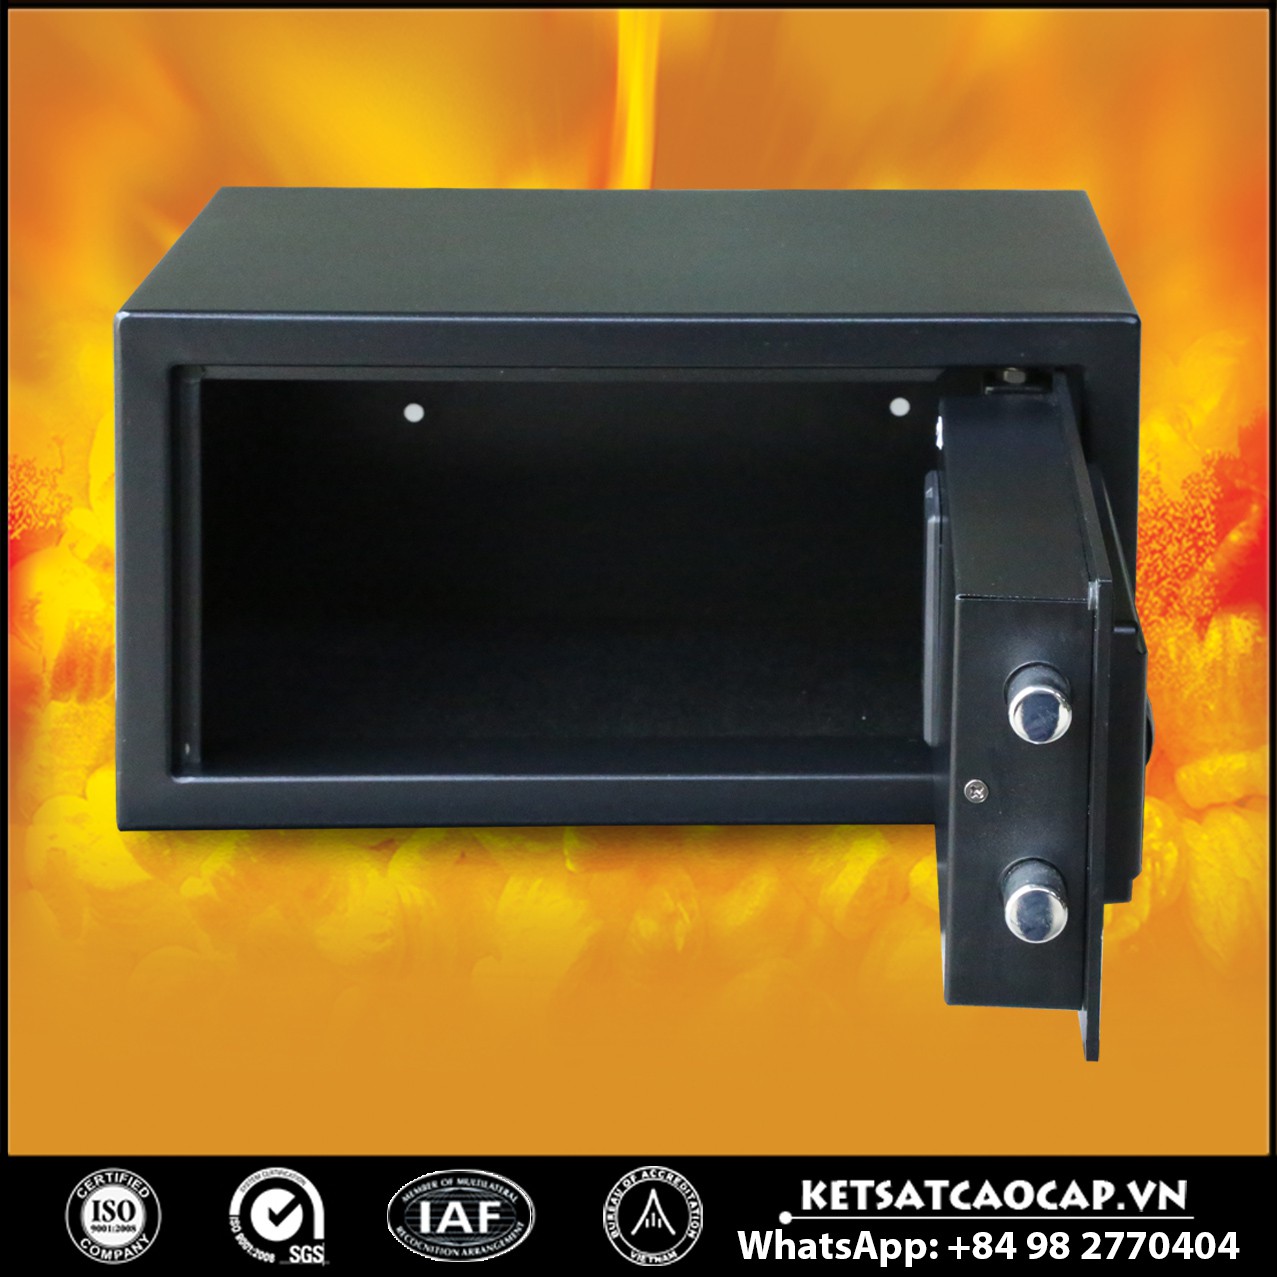 Safe in Hotel Manufacturers & Suppliers‎